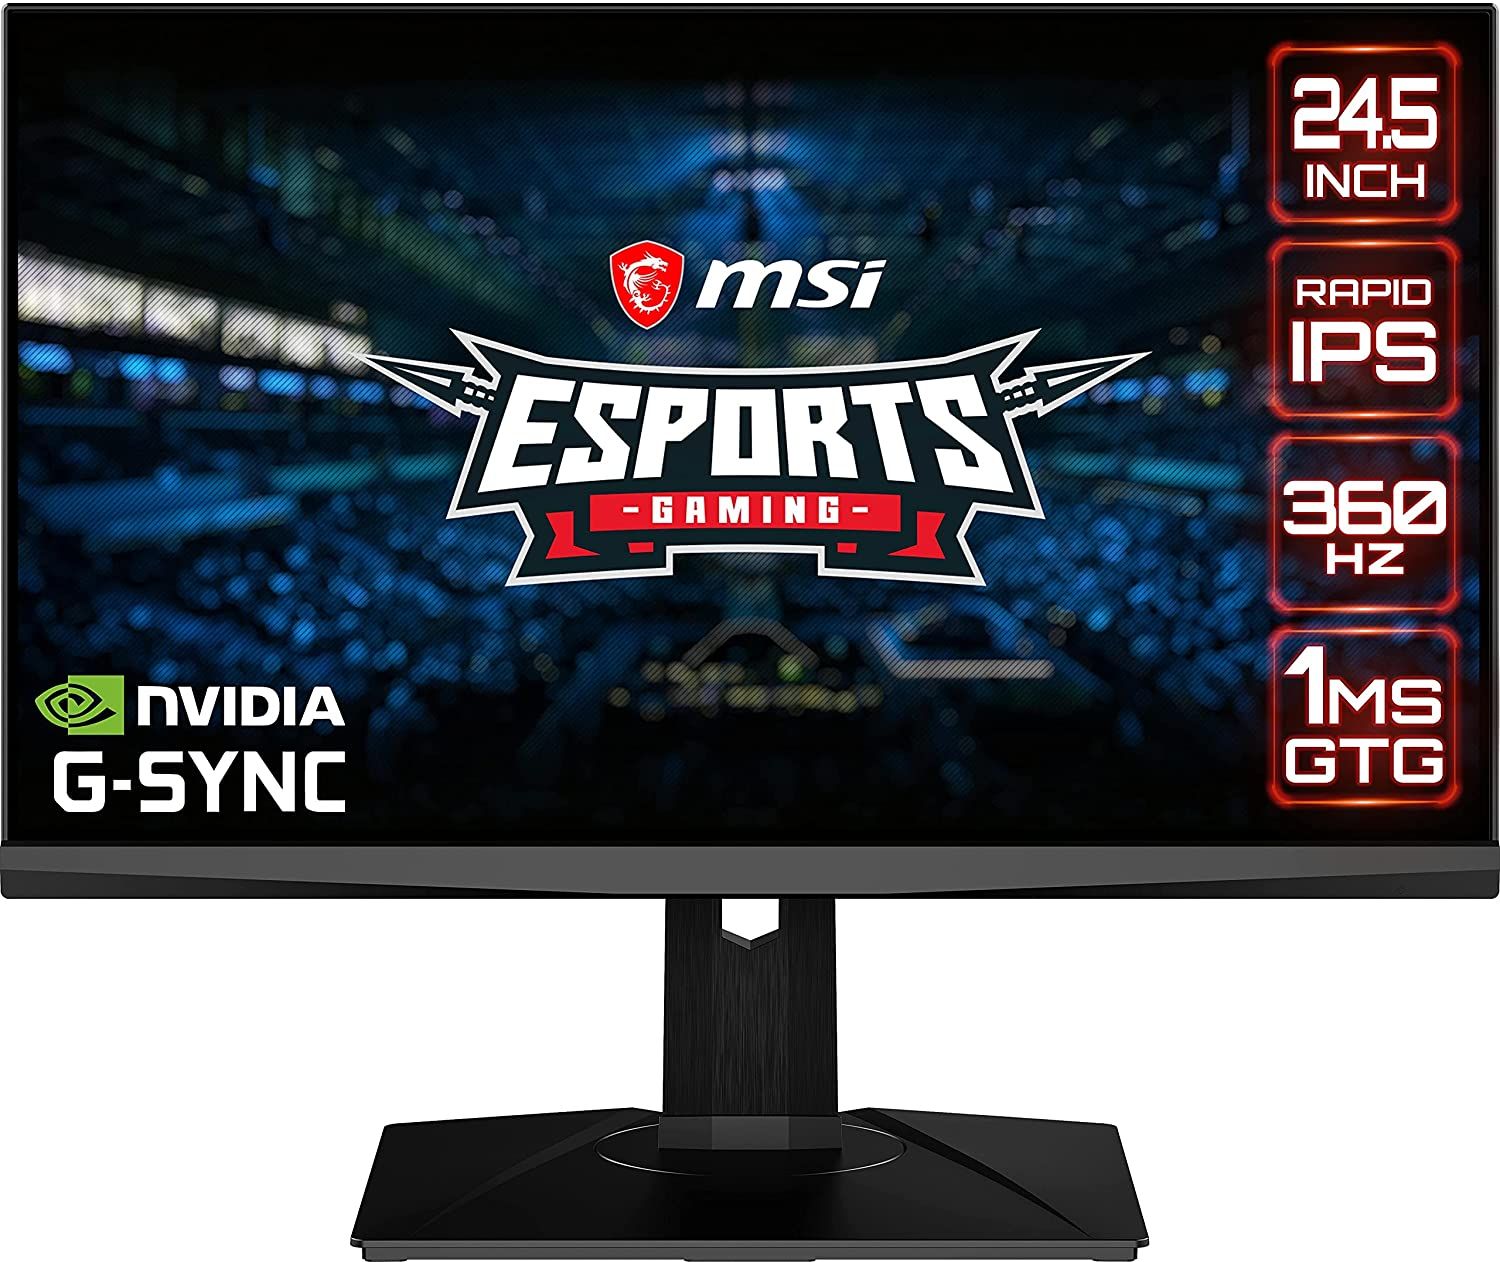 MSI Oculux NXG253R product image of a black monitor with MSI esports branding in red and white on the display.